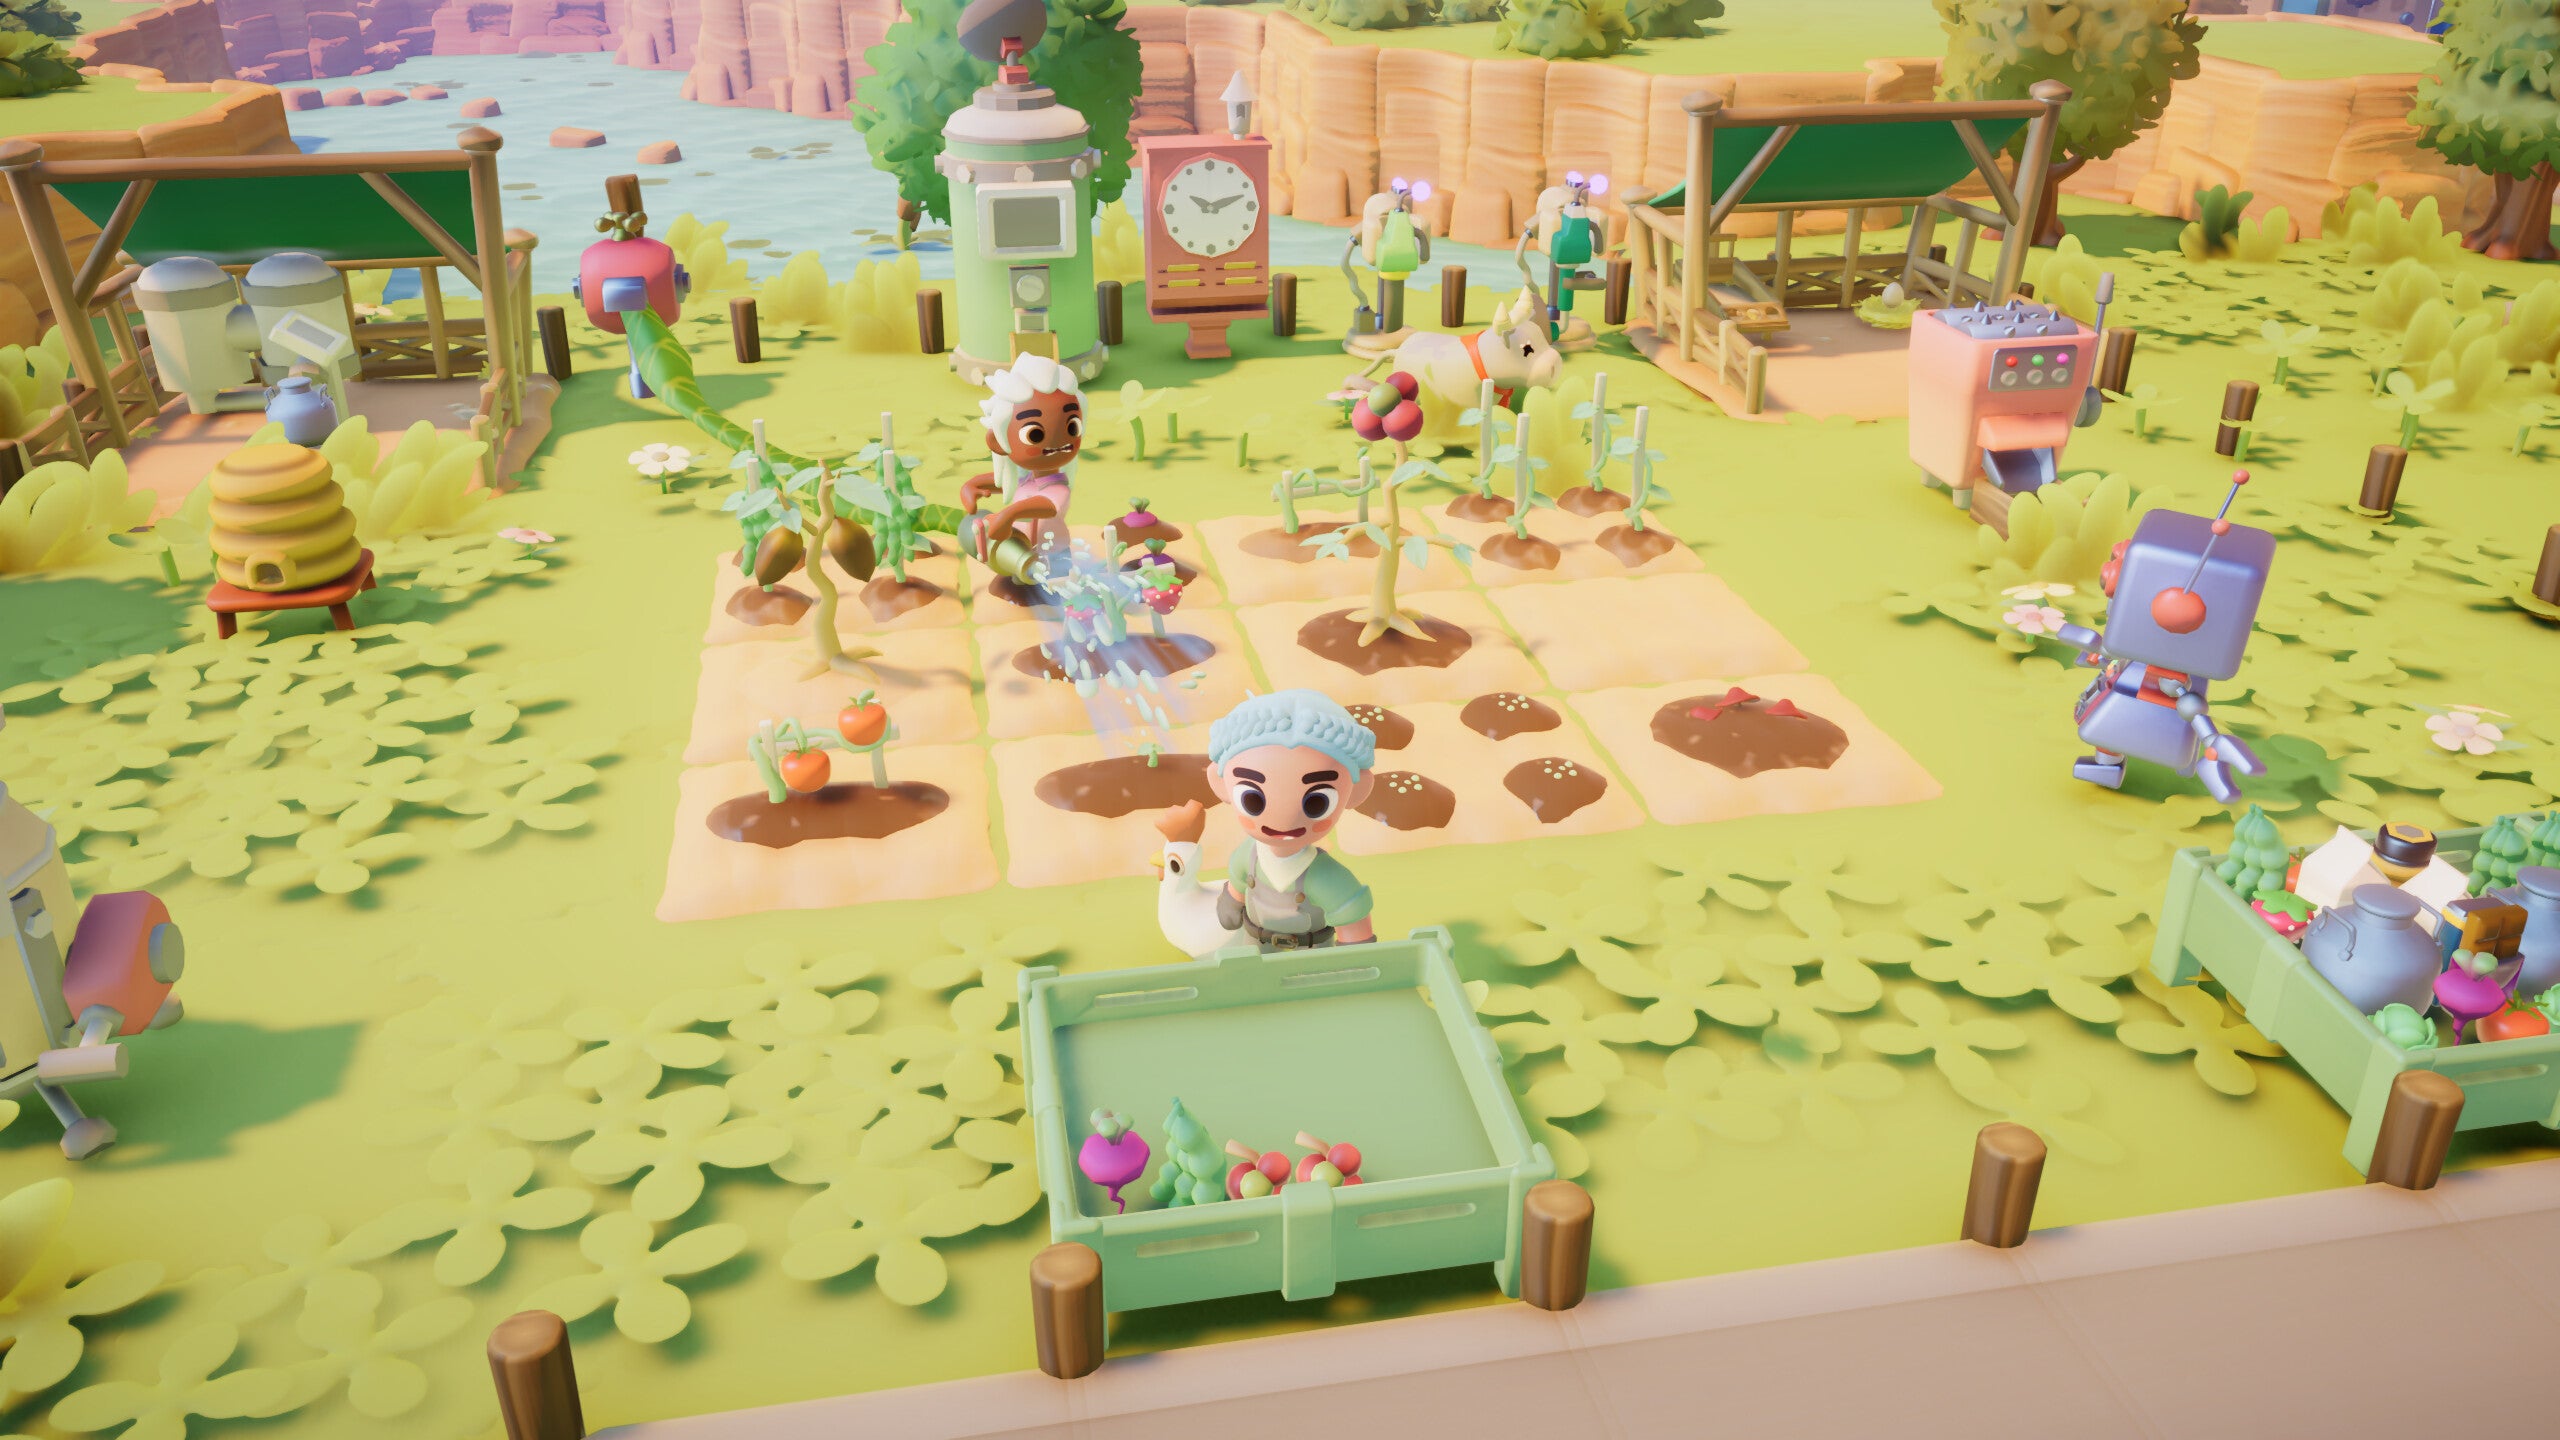 Some cute crop watering and collecting in Go-Go Town!